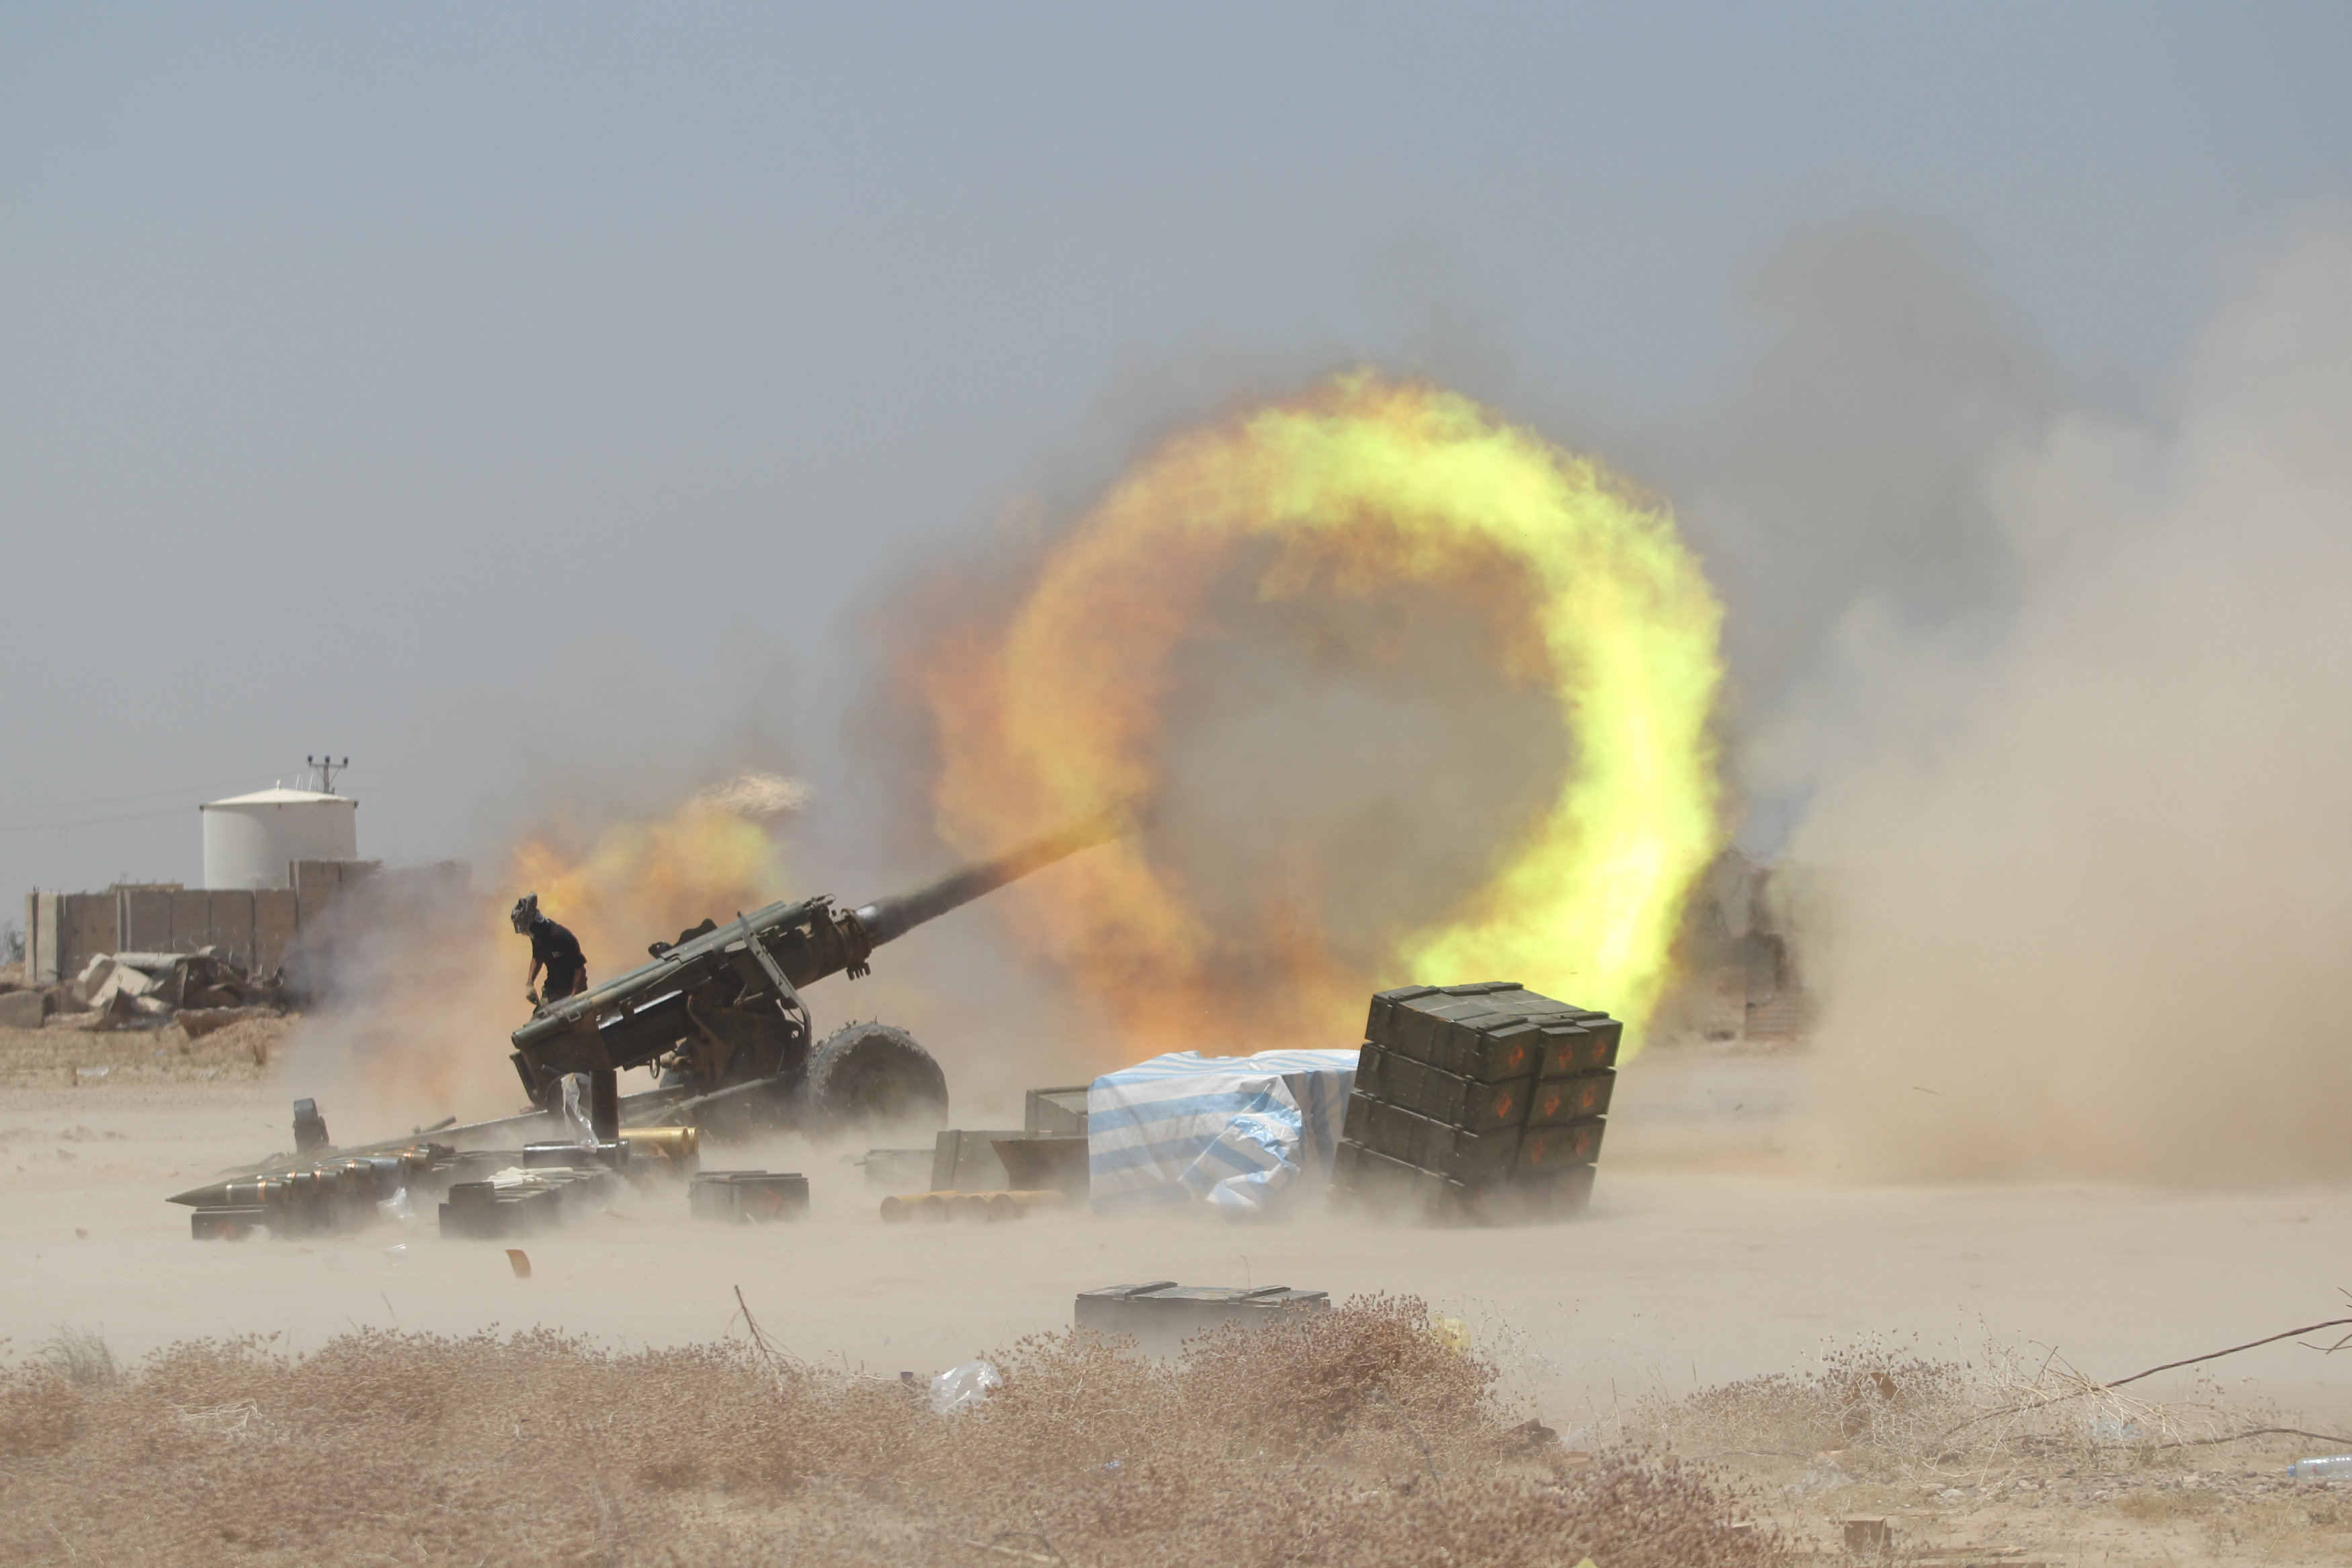 An Iraqi Shiite fighter fires artillery during clashes with Islamic State militants near Falluja, Iraq, May 29, 2016.